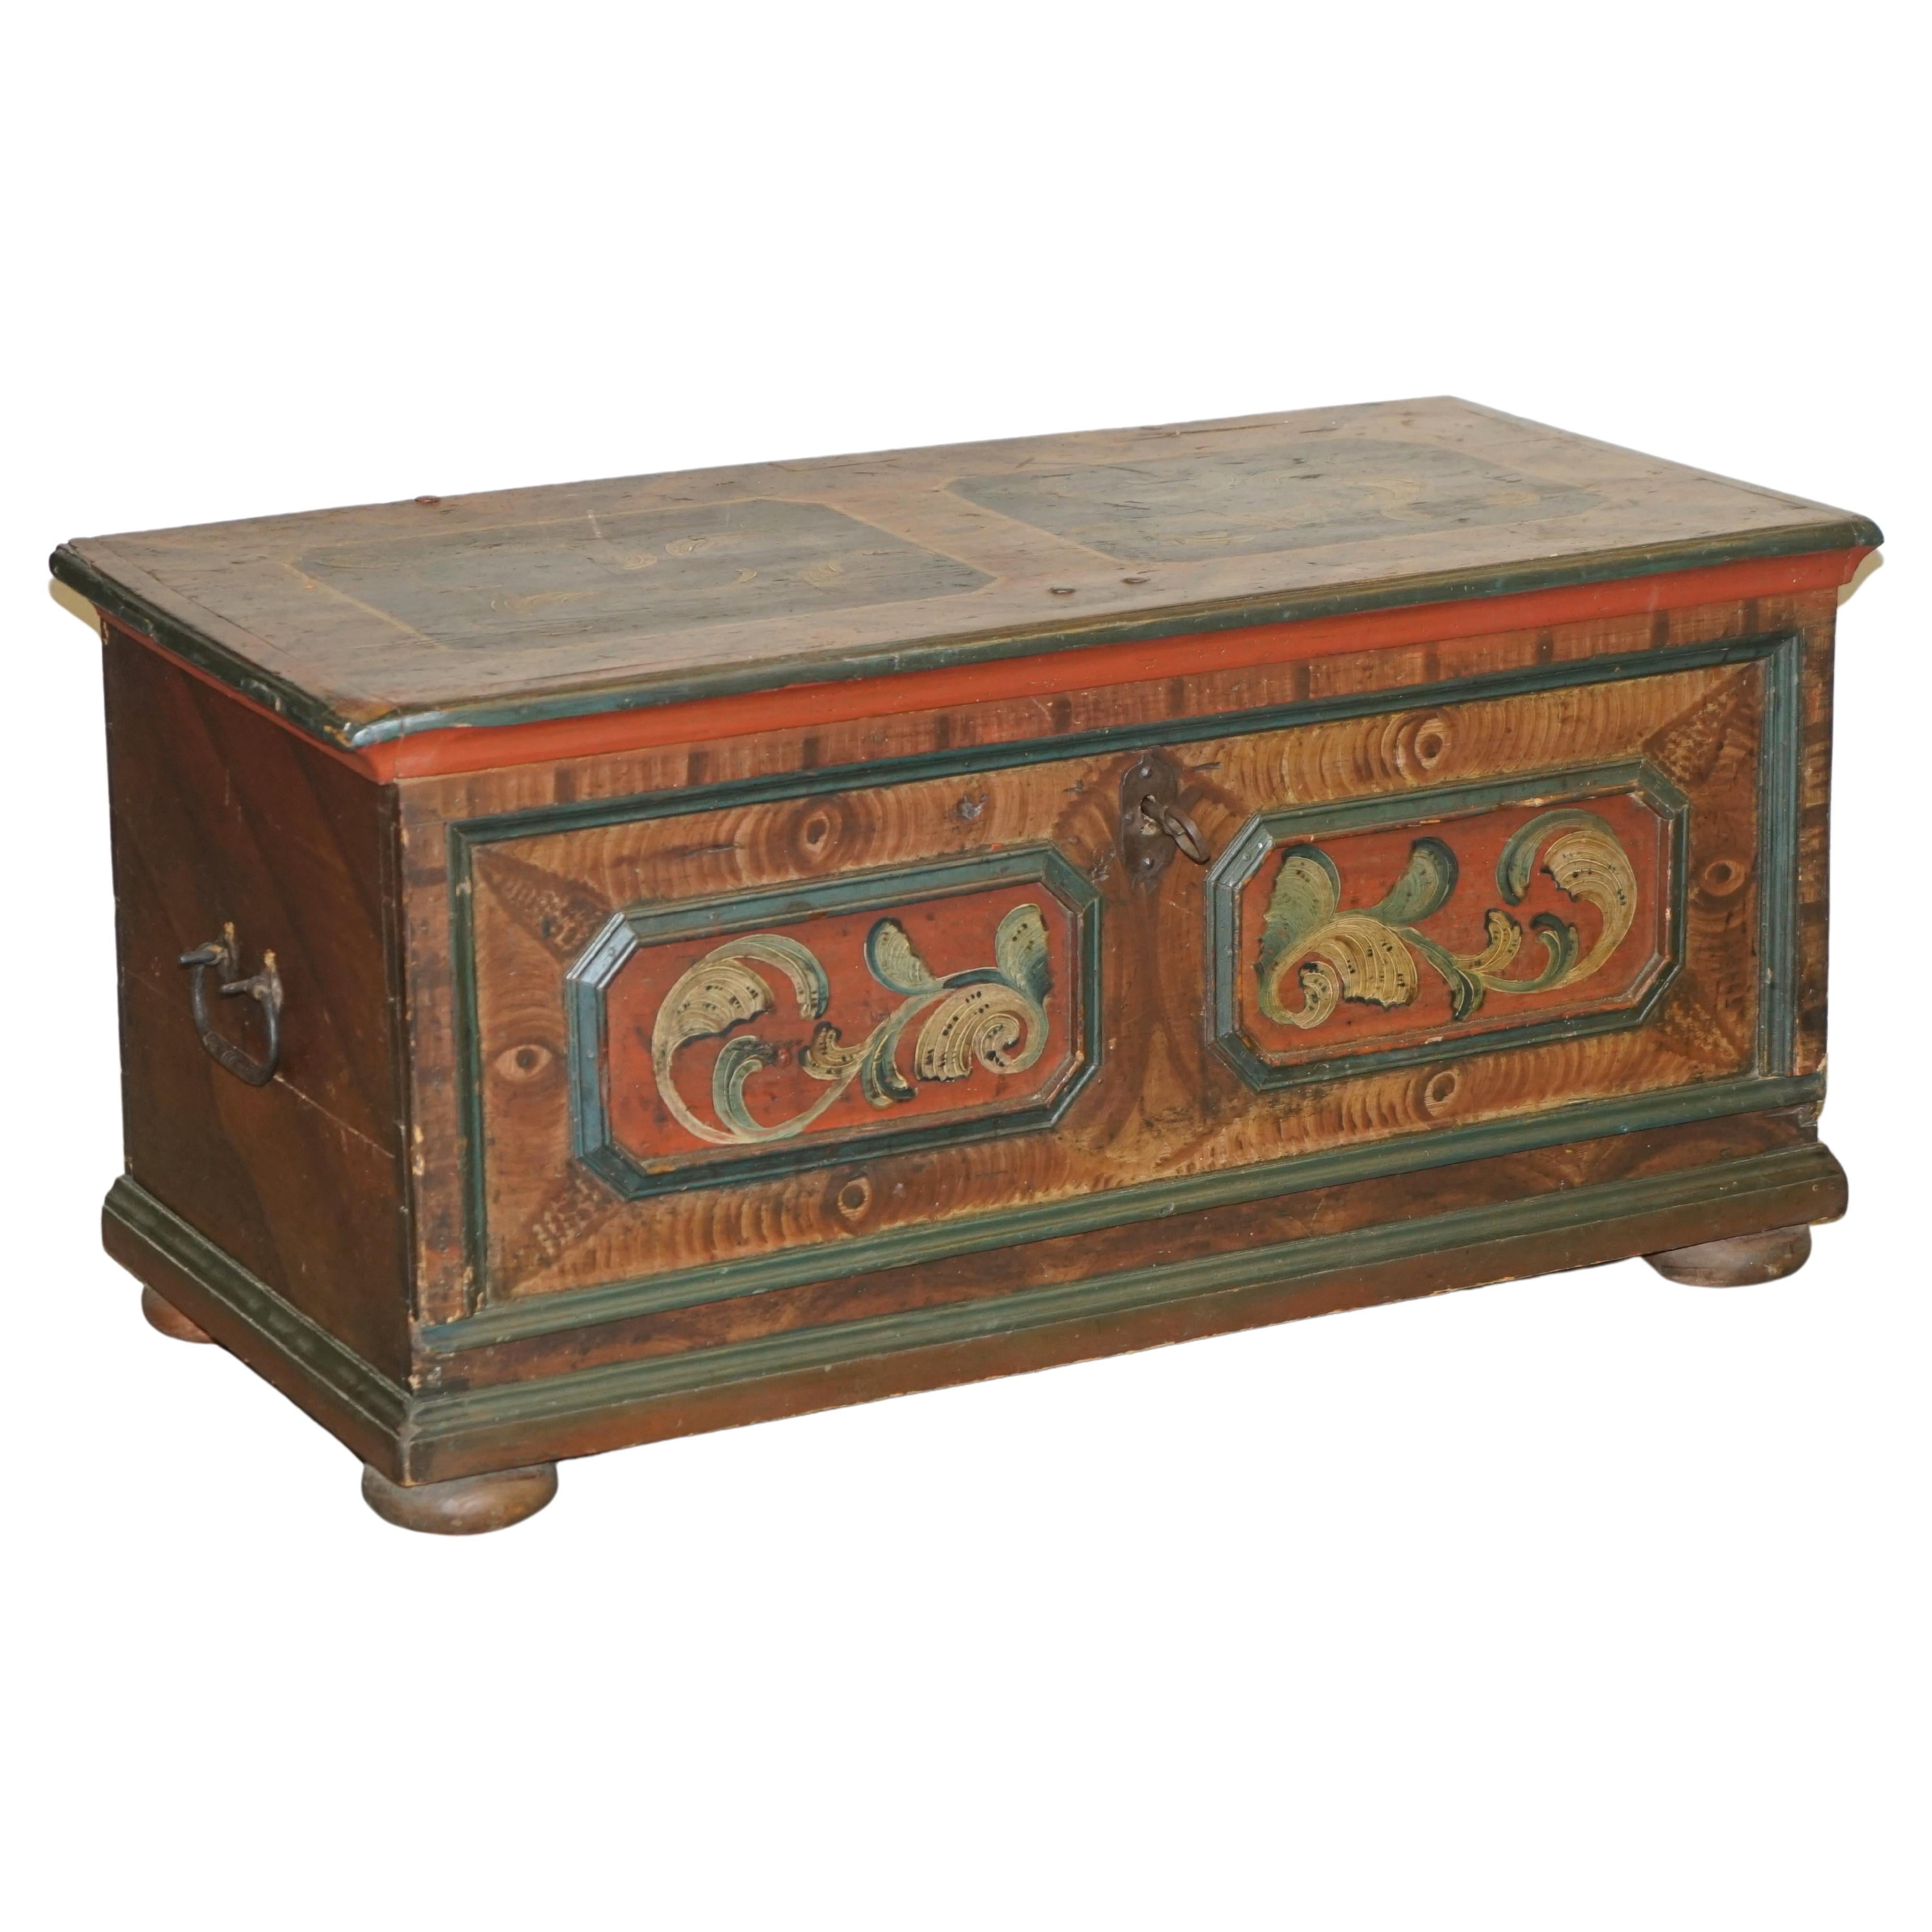 circa 1800 Extra Large Antique Original Paint German Blanket Chest Coffer Trunk For Sale